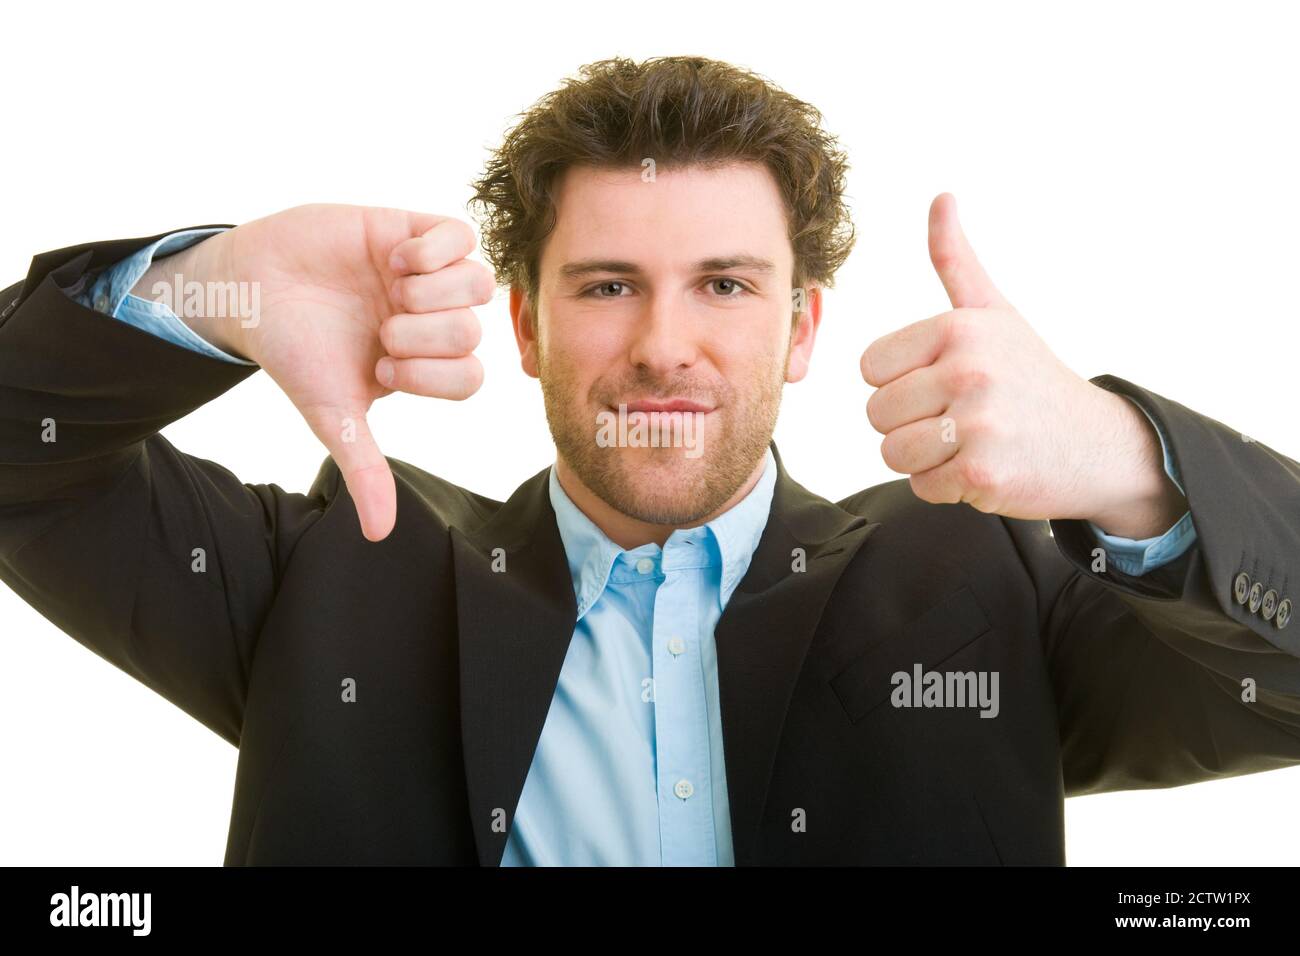 Young man in business attire shows one thumb up and the other down Stock Photo